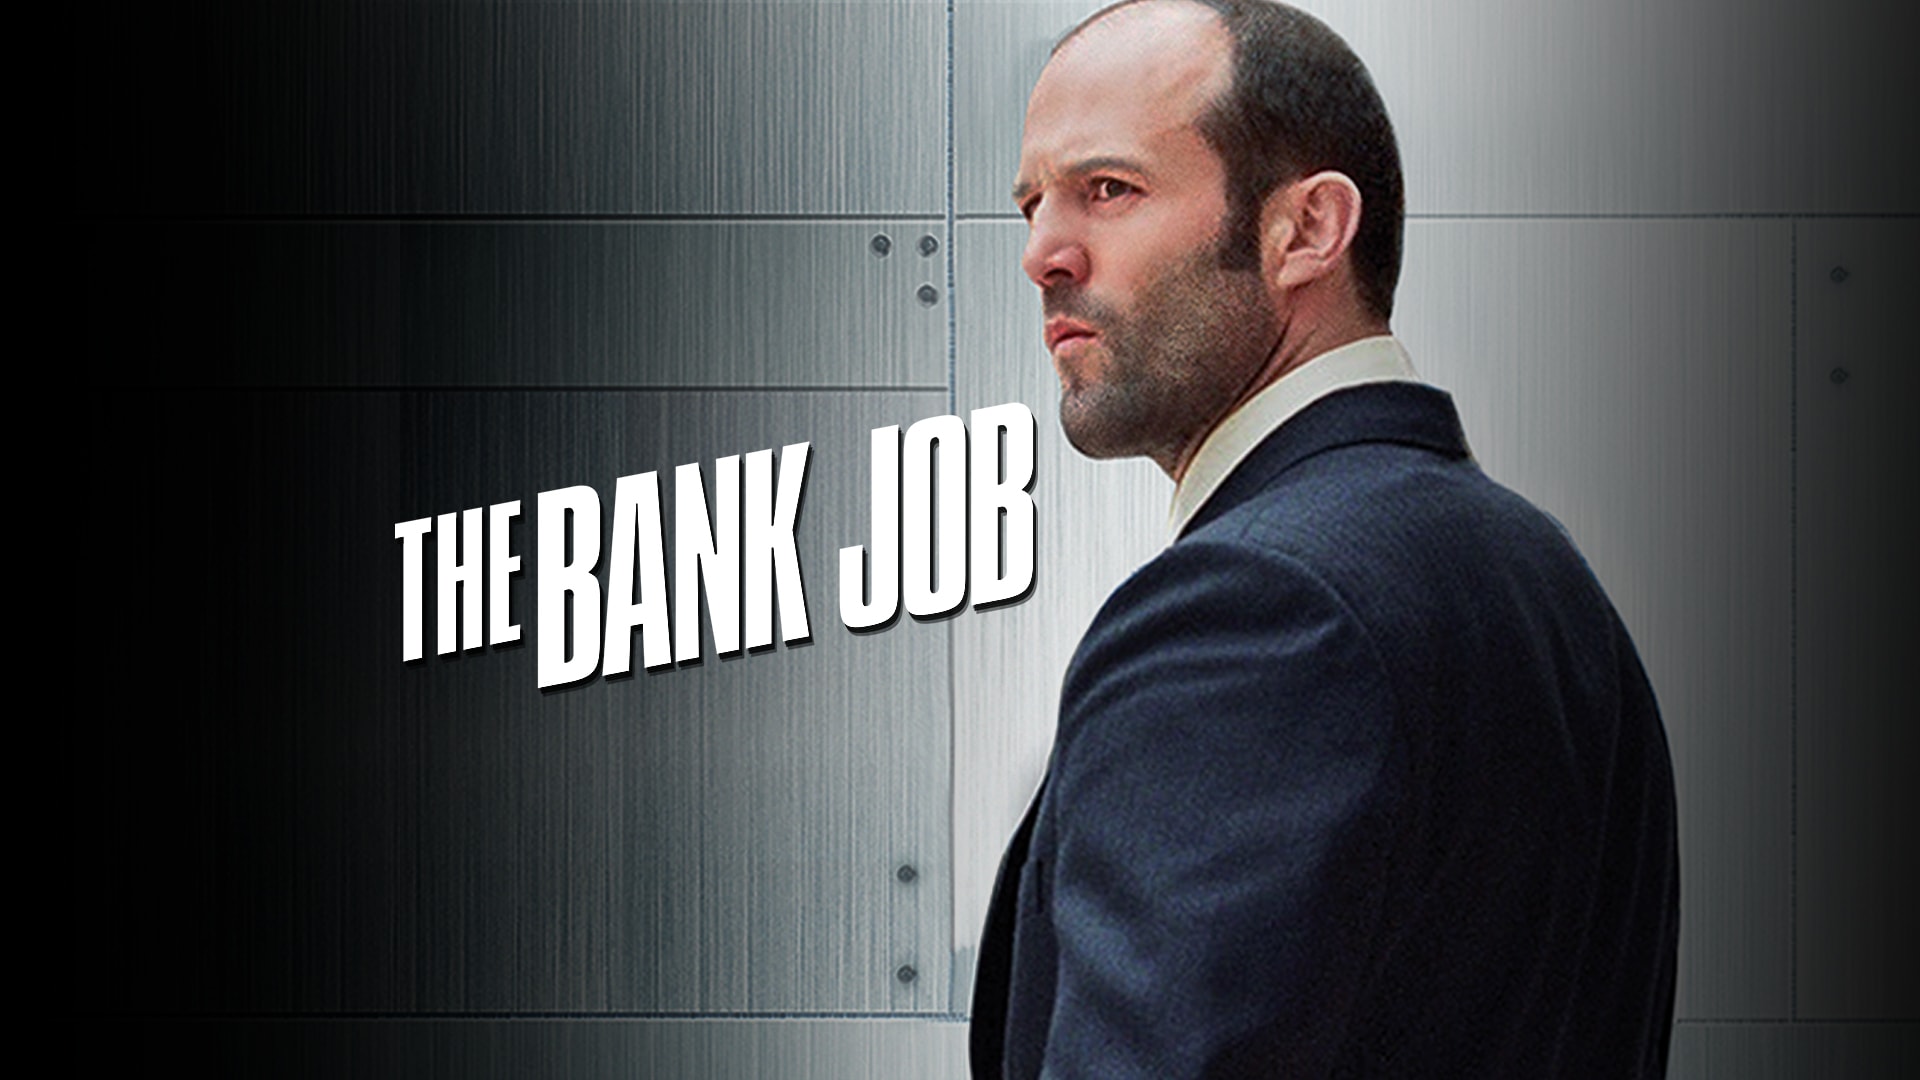 Watch The Bank Job Online | Stream Full Movies